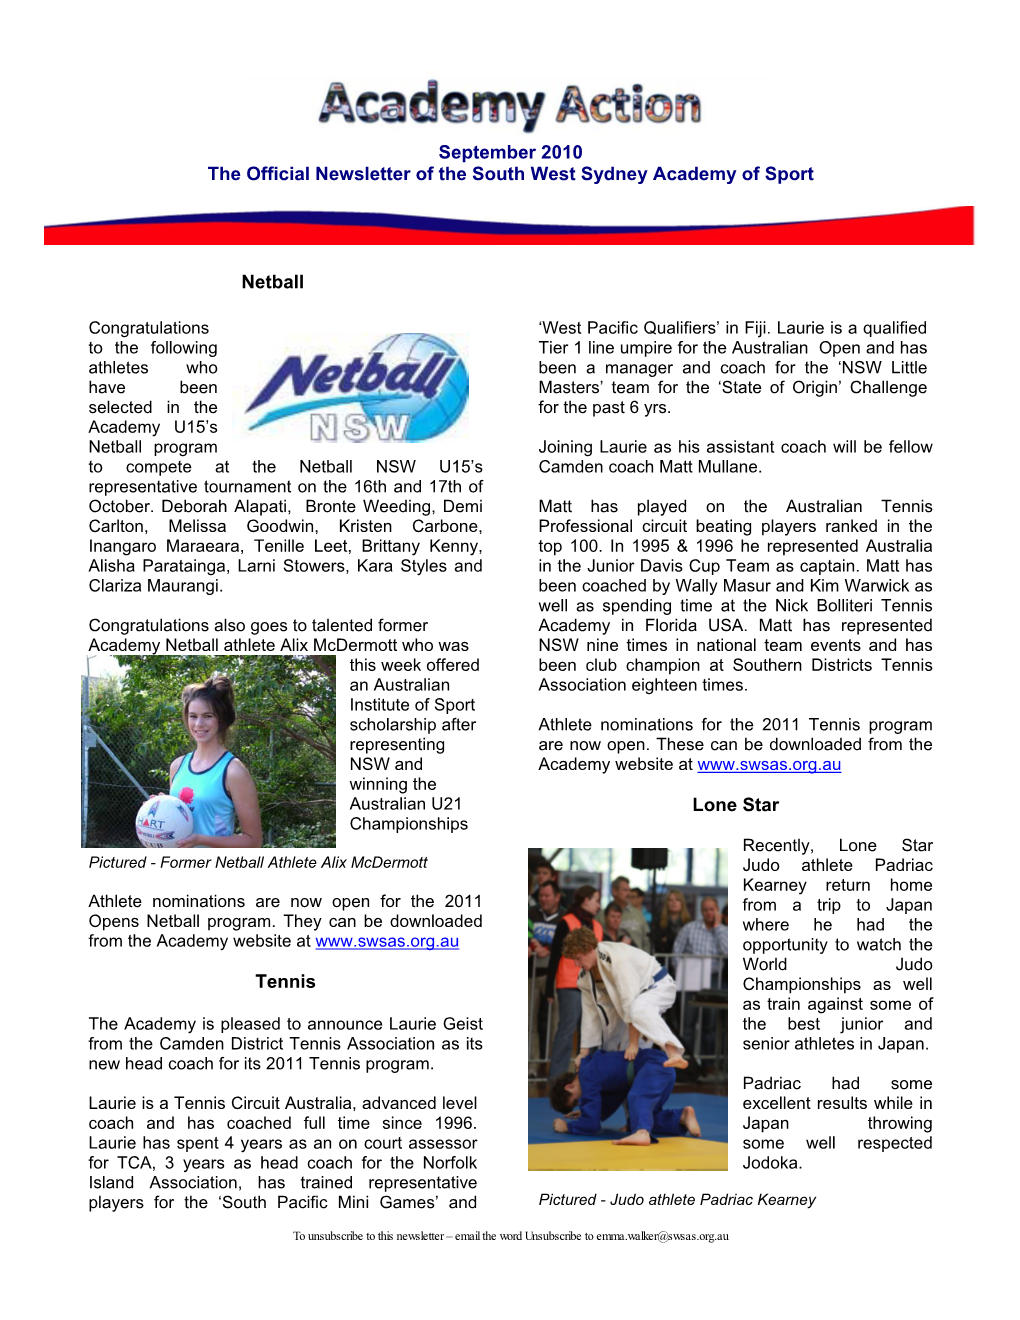 September 2010 the Official Newsletter of the South West Sydney Academy of Sport Netball Tennis Lone Star